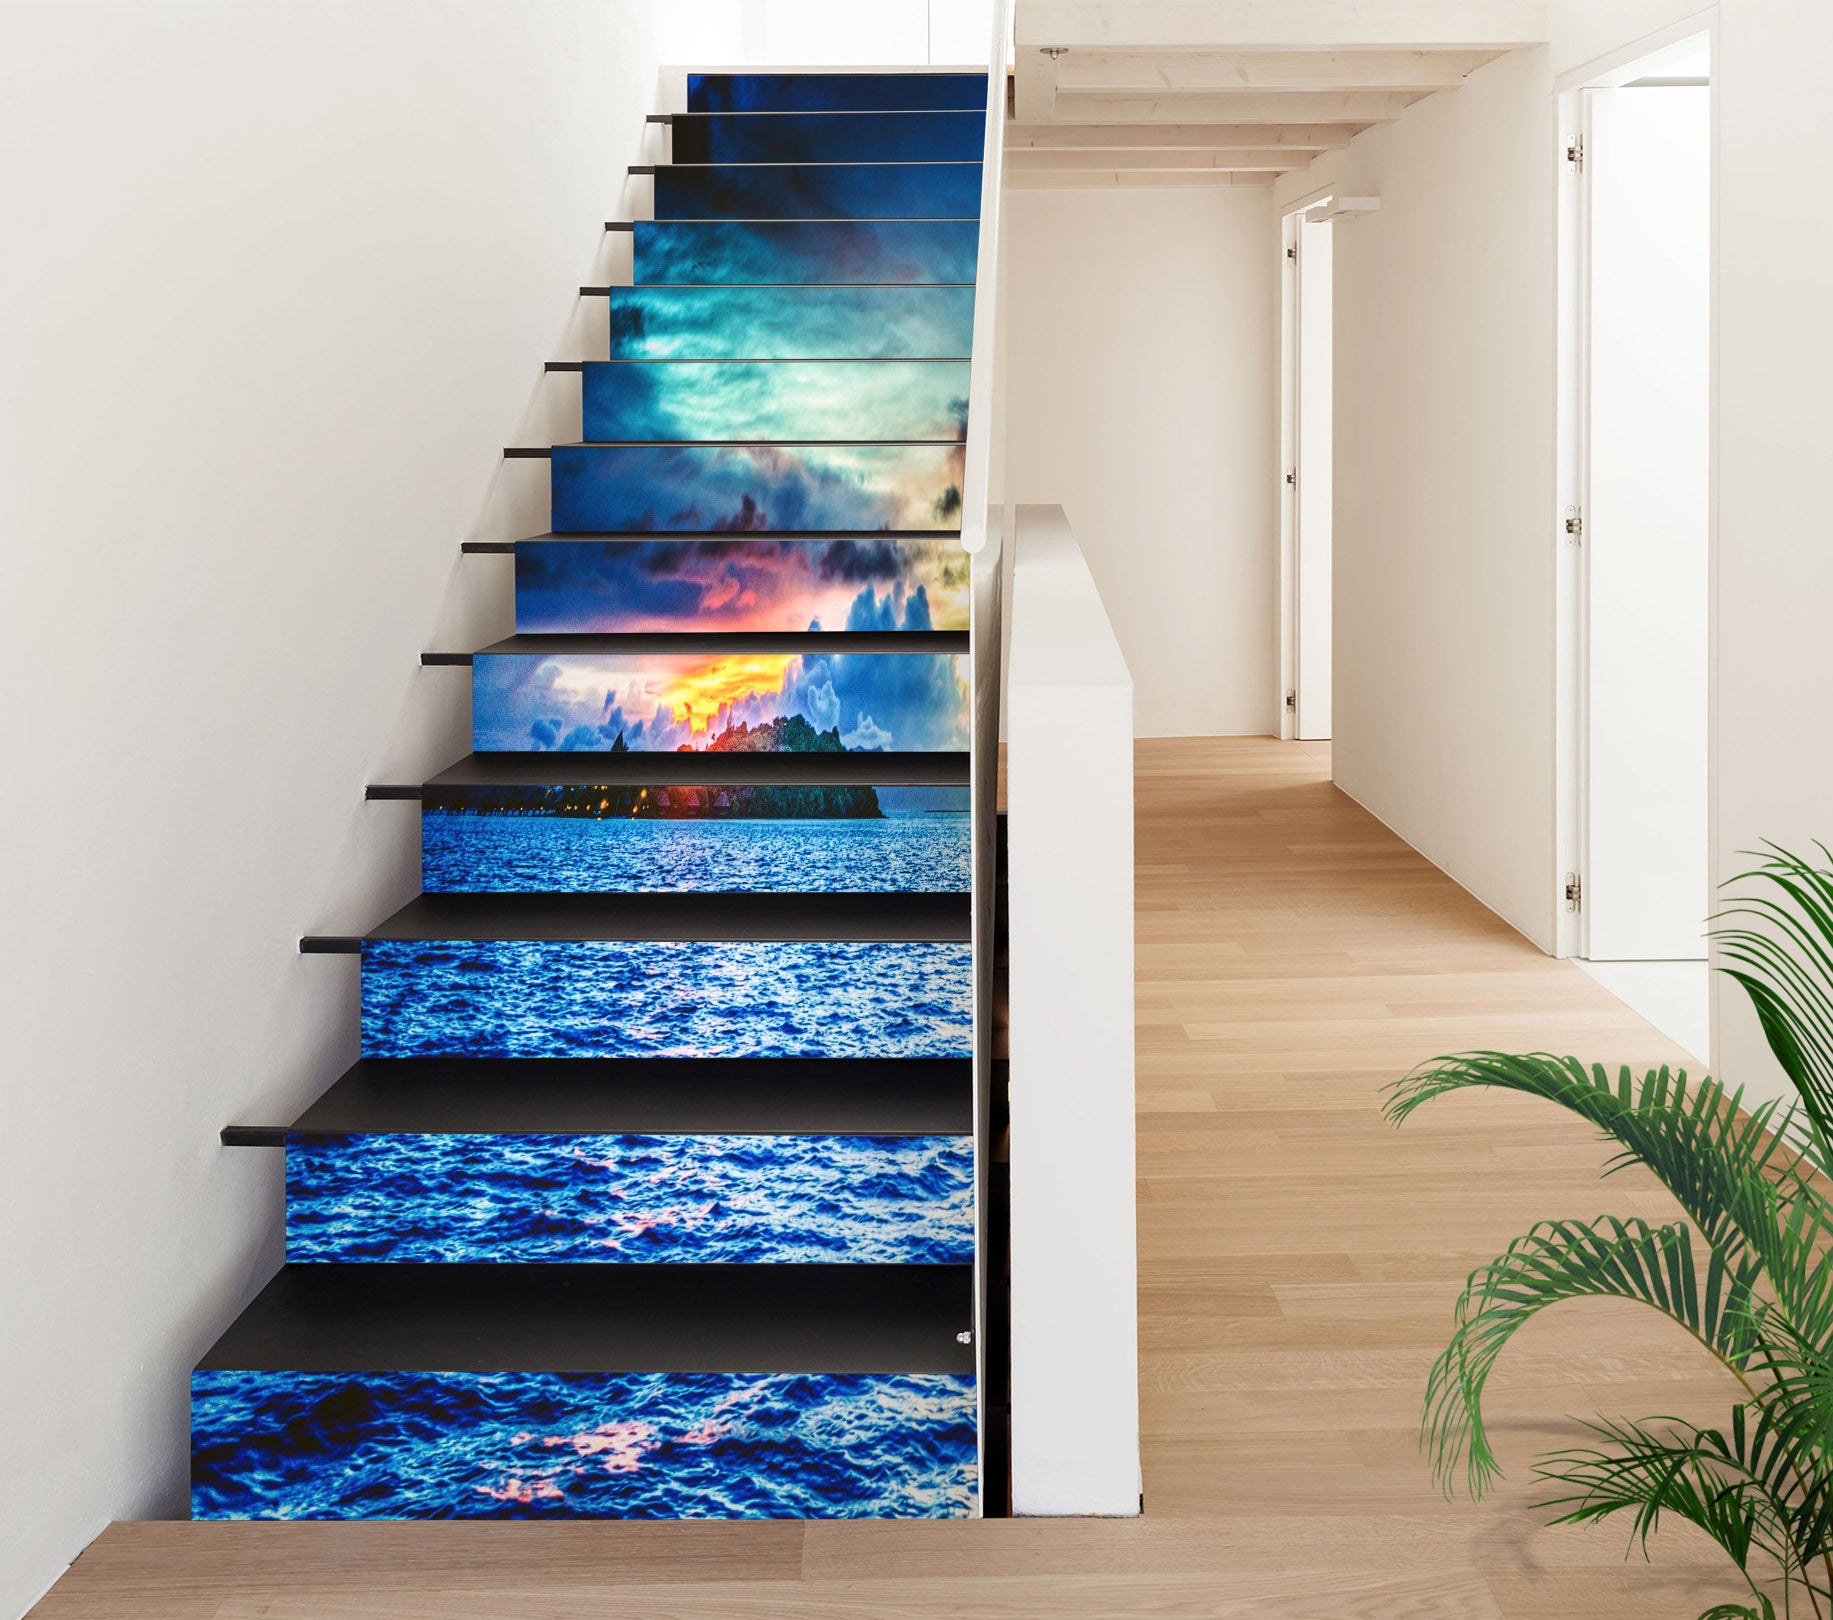 3D The Other Side Of Sea Blue 632 Stair Risers